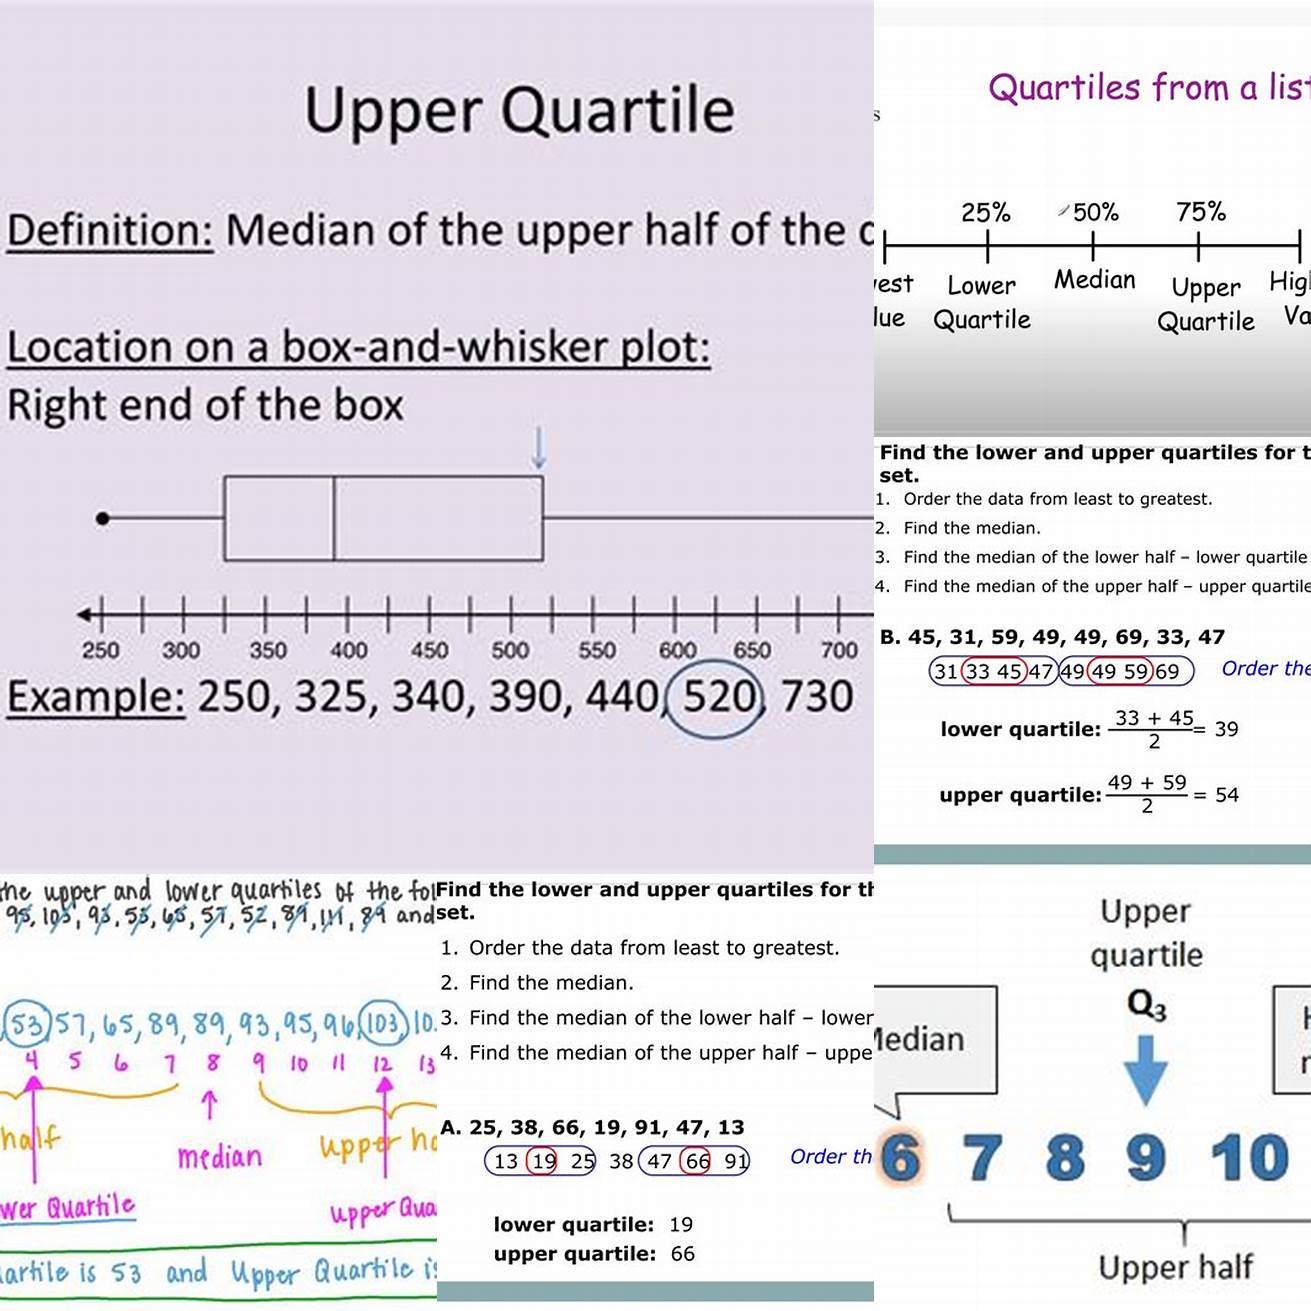 Find the upper quartile which is the median of the upper half of the data